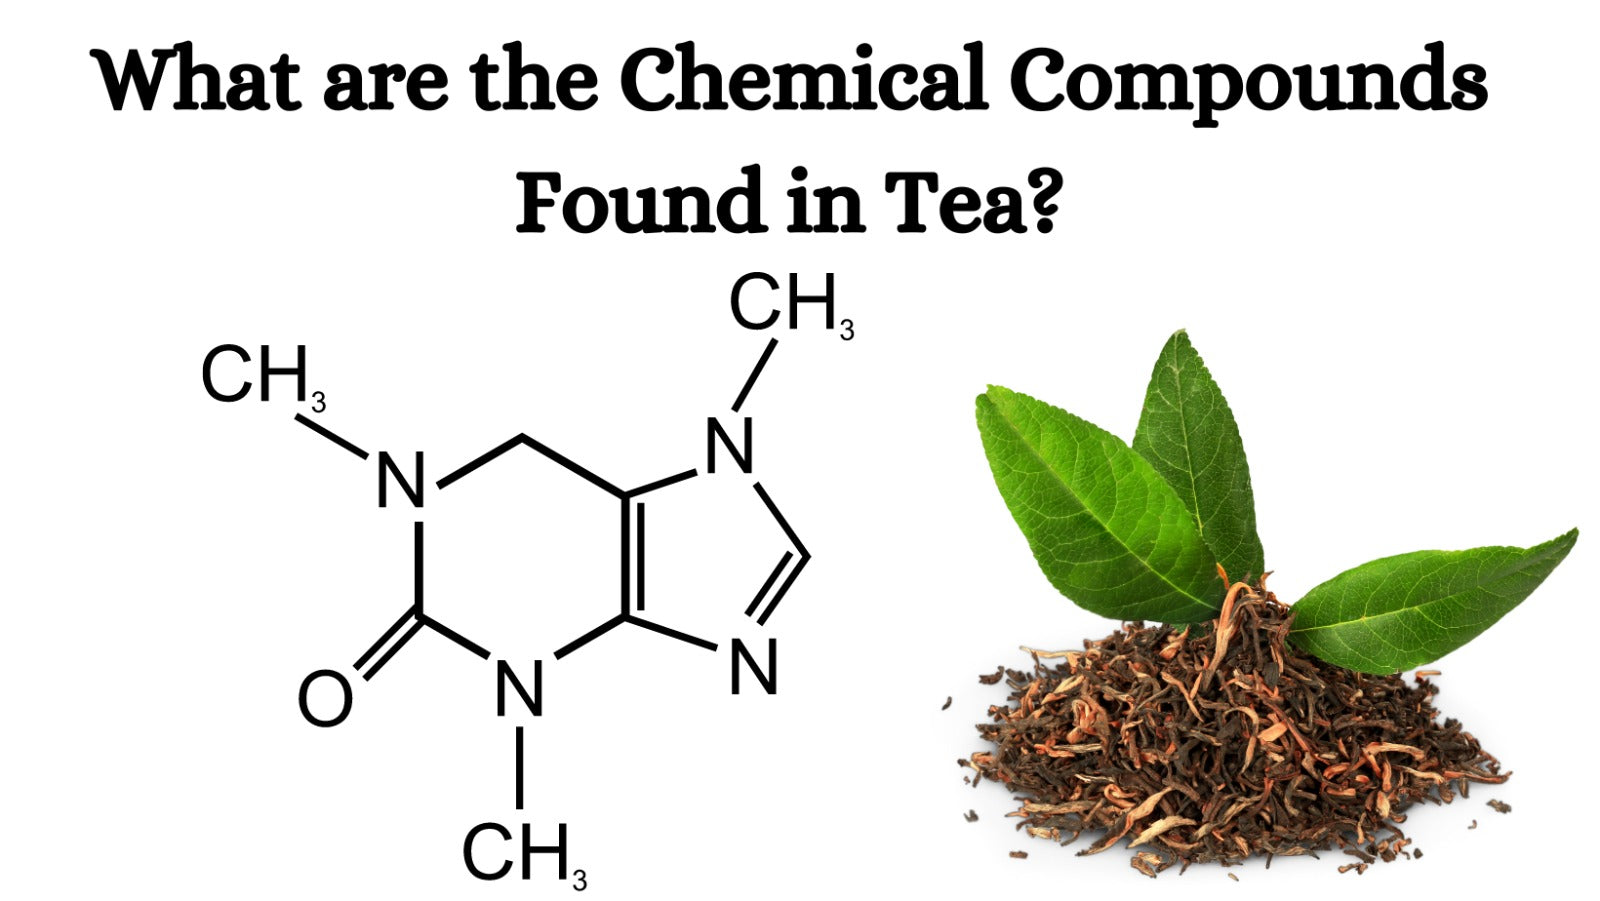 What are the Chemical Compounds Found in Tea?